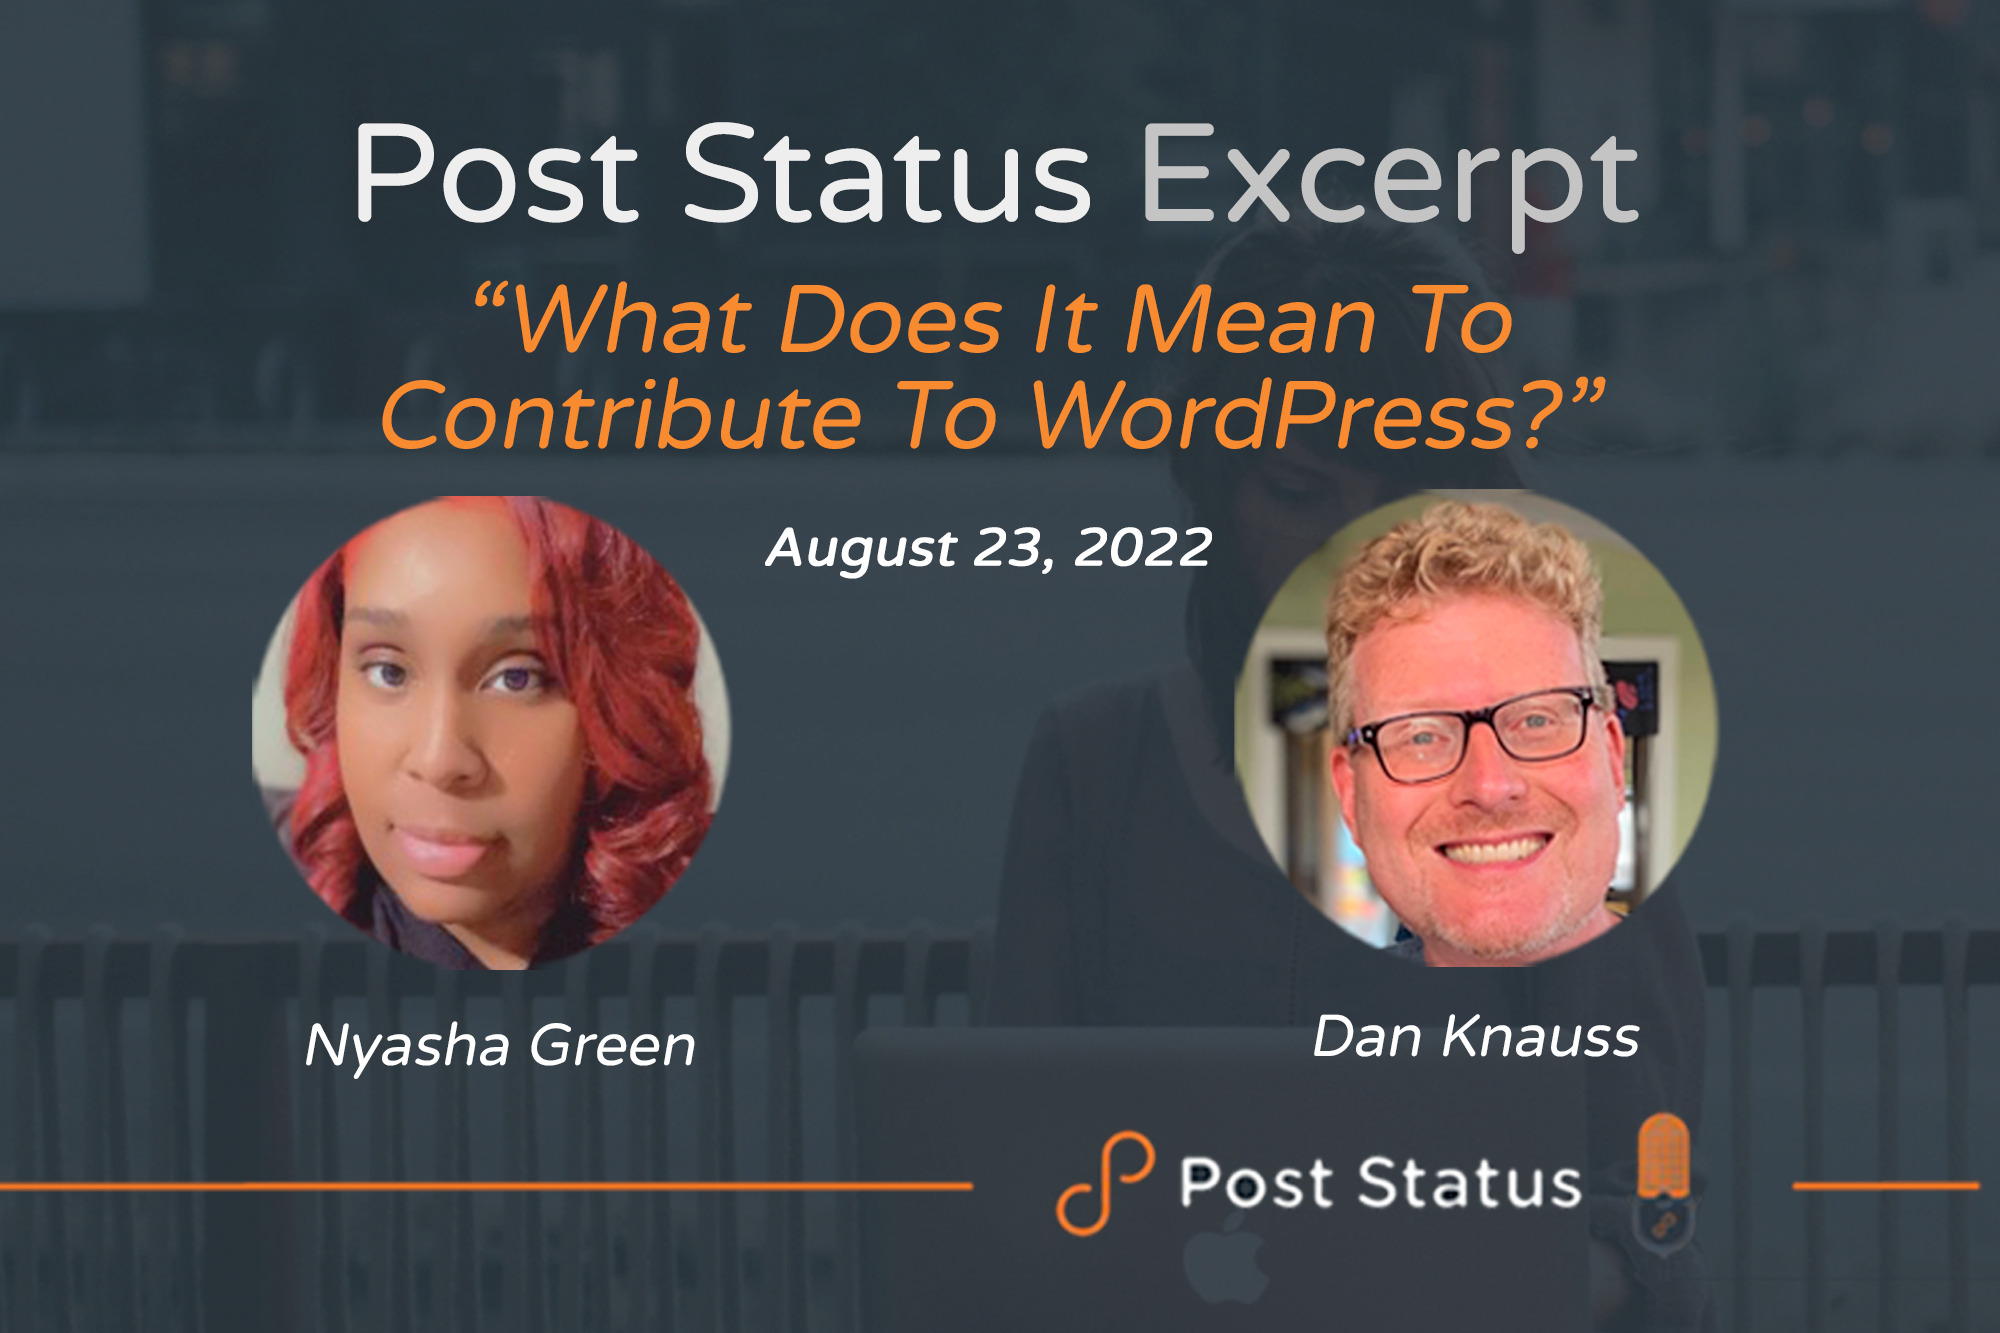 Post Status Excerpt (No. 66) — What Does It Mean To Contribute To WordPress?